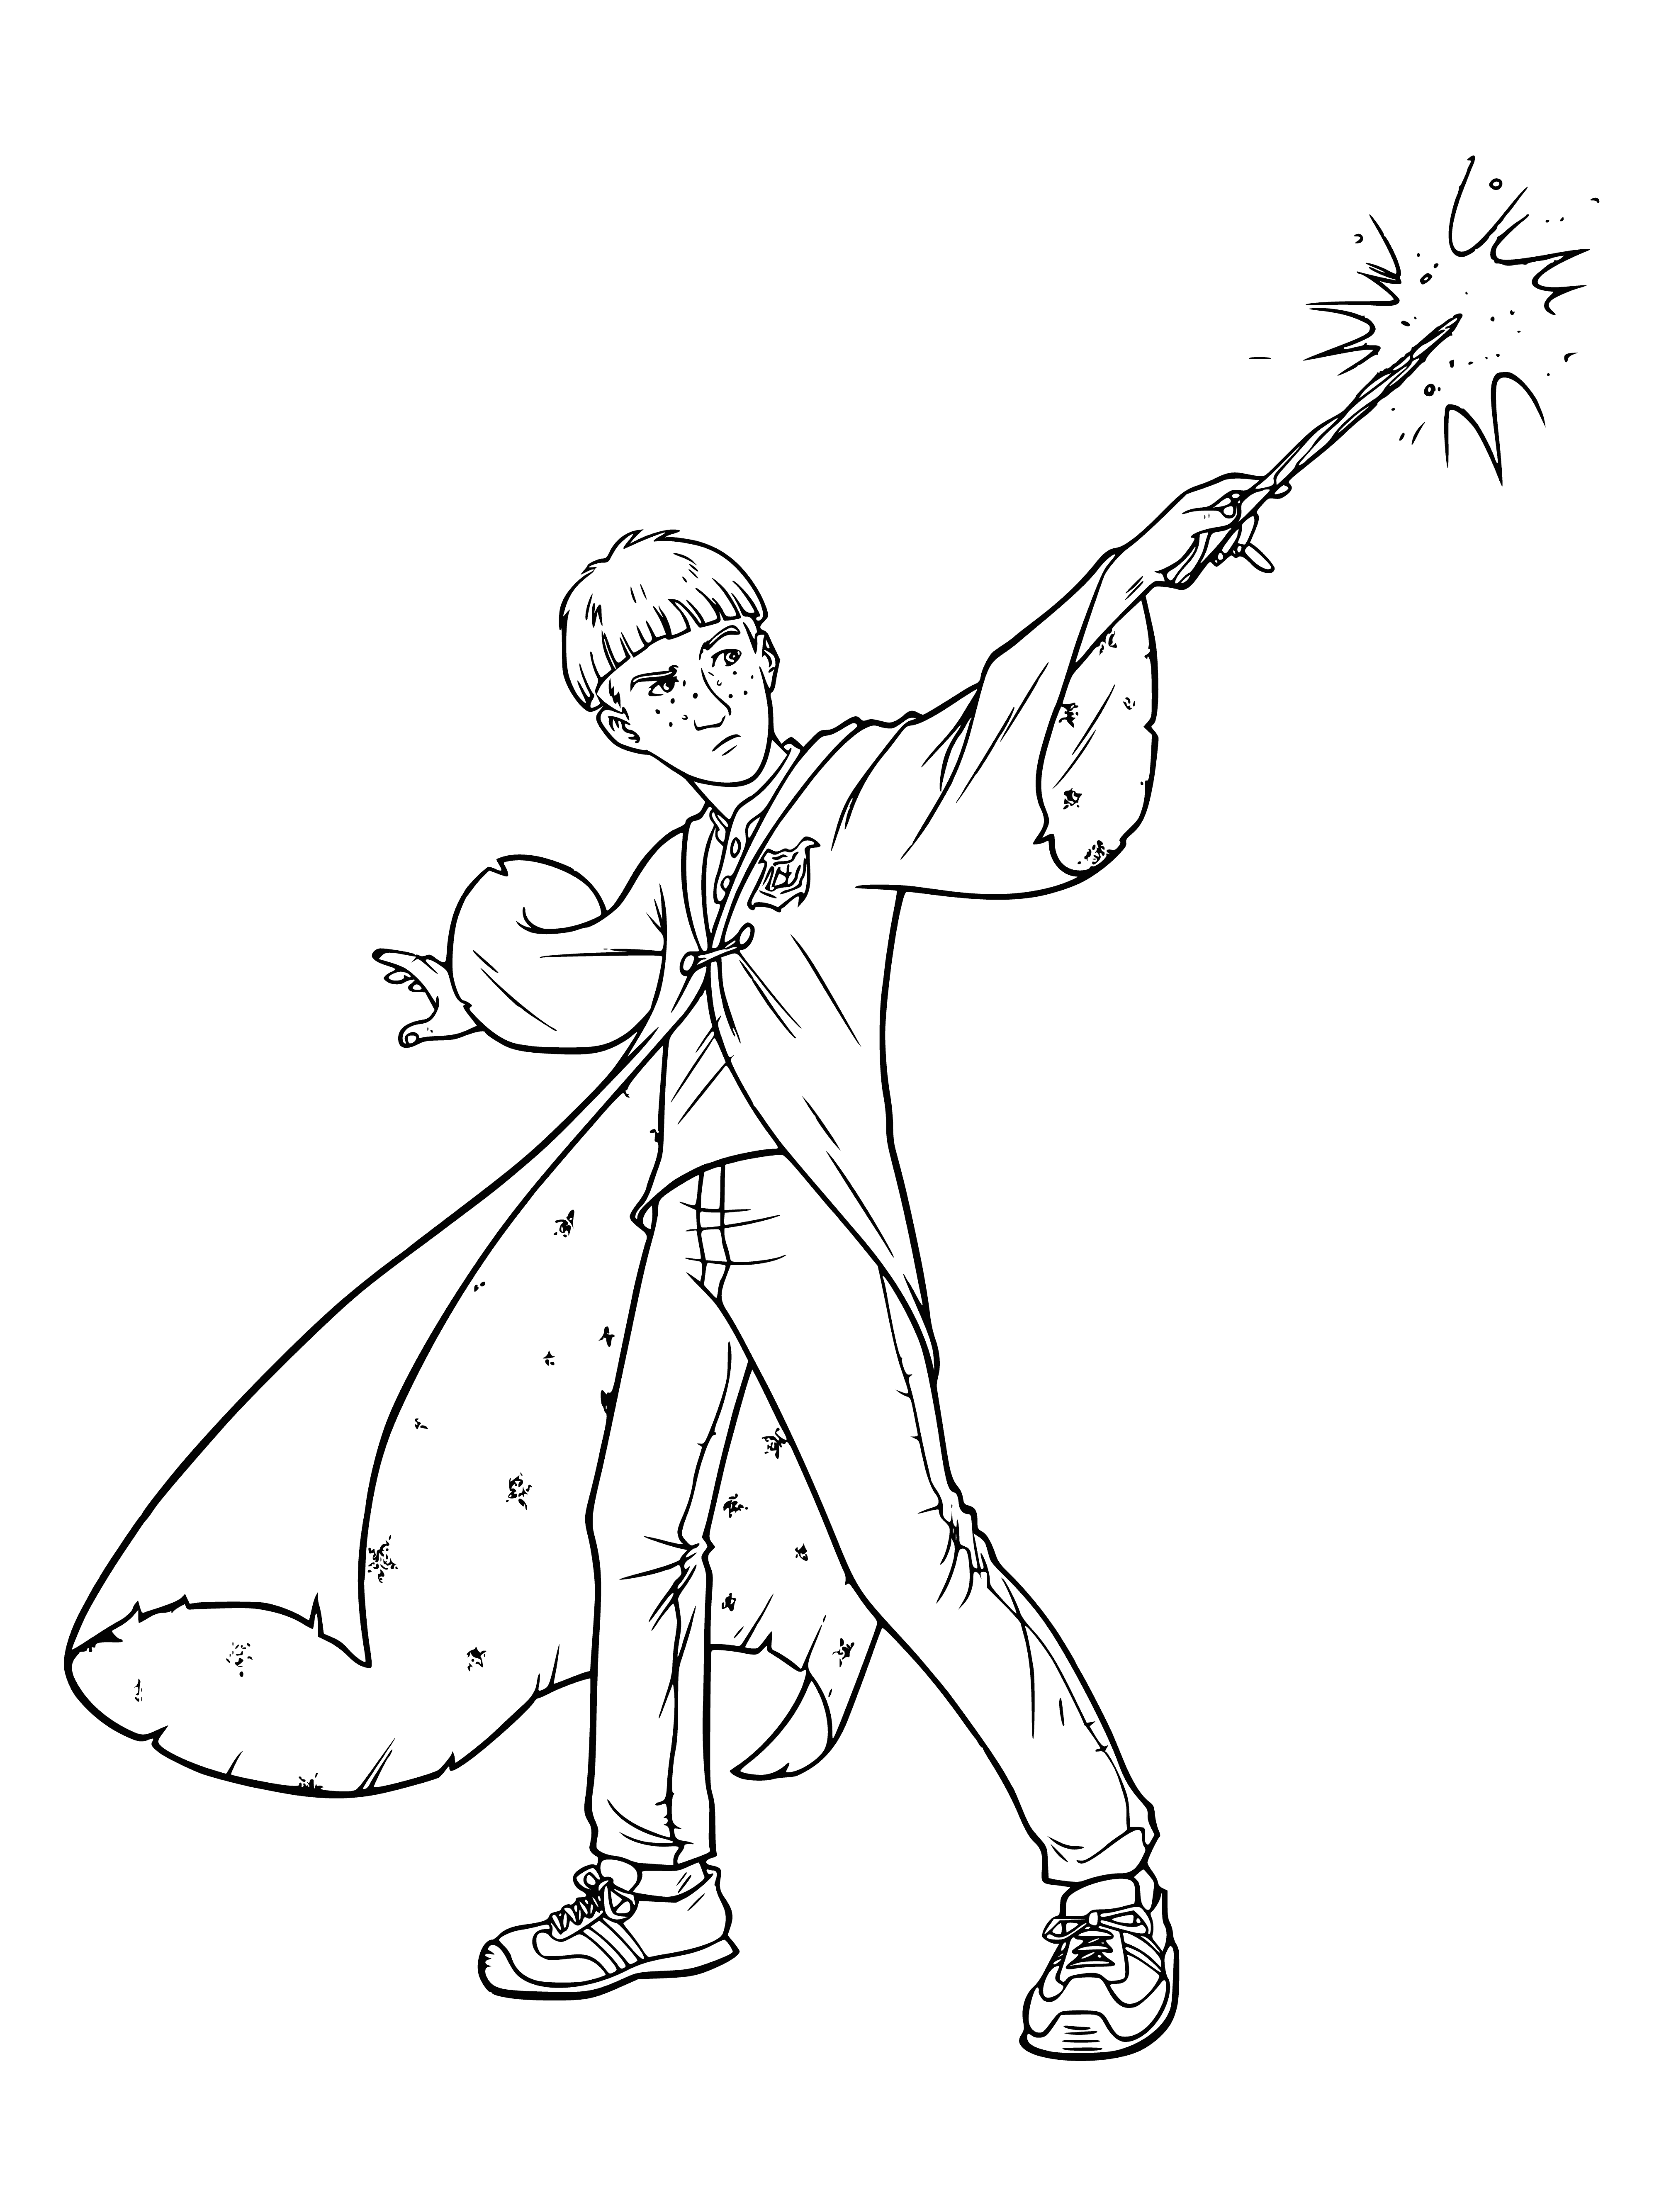 Wizard with wand coloring page